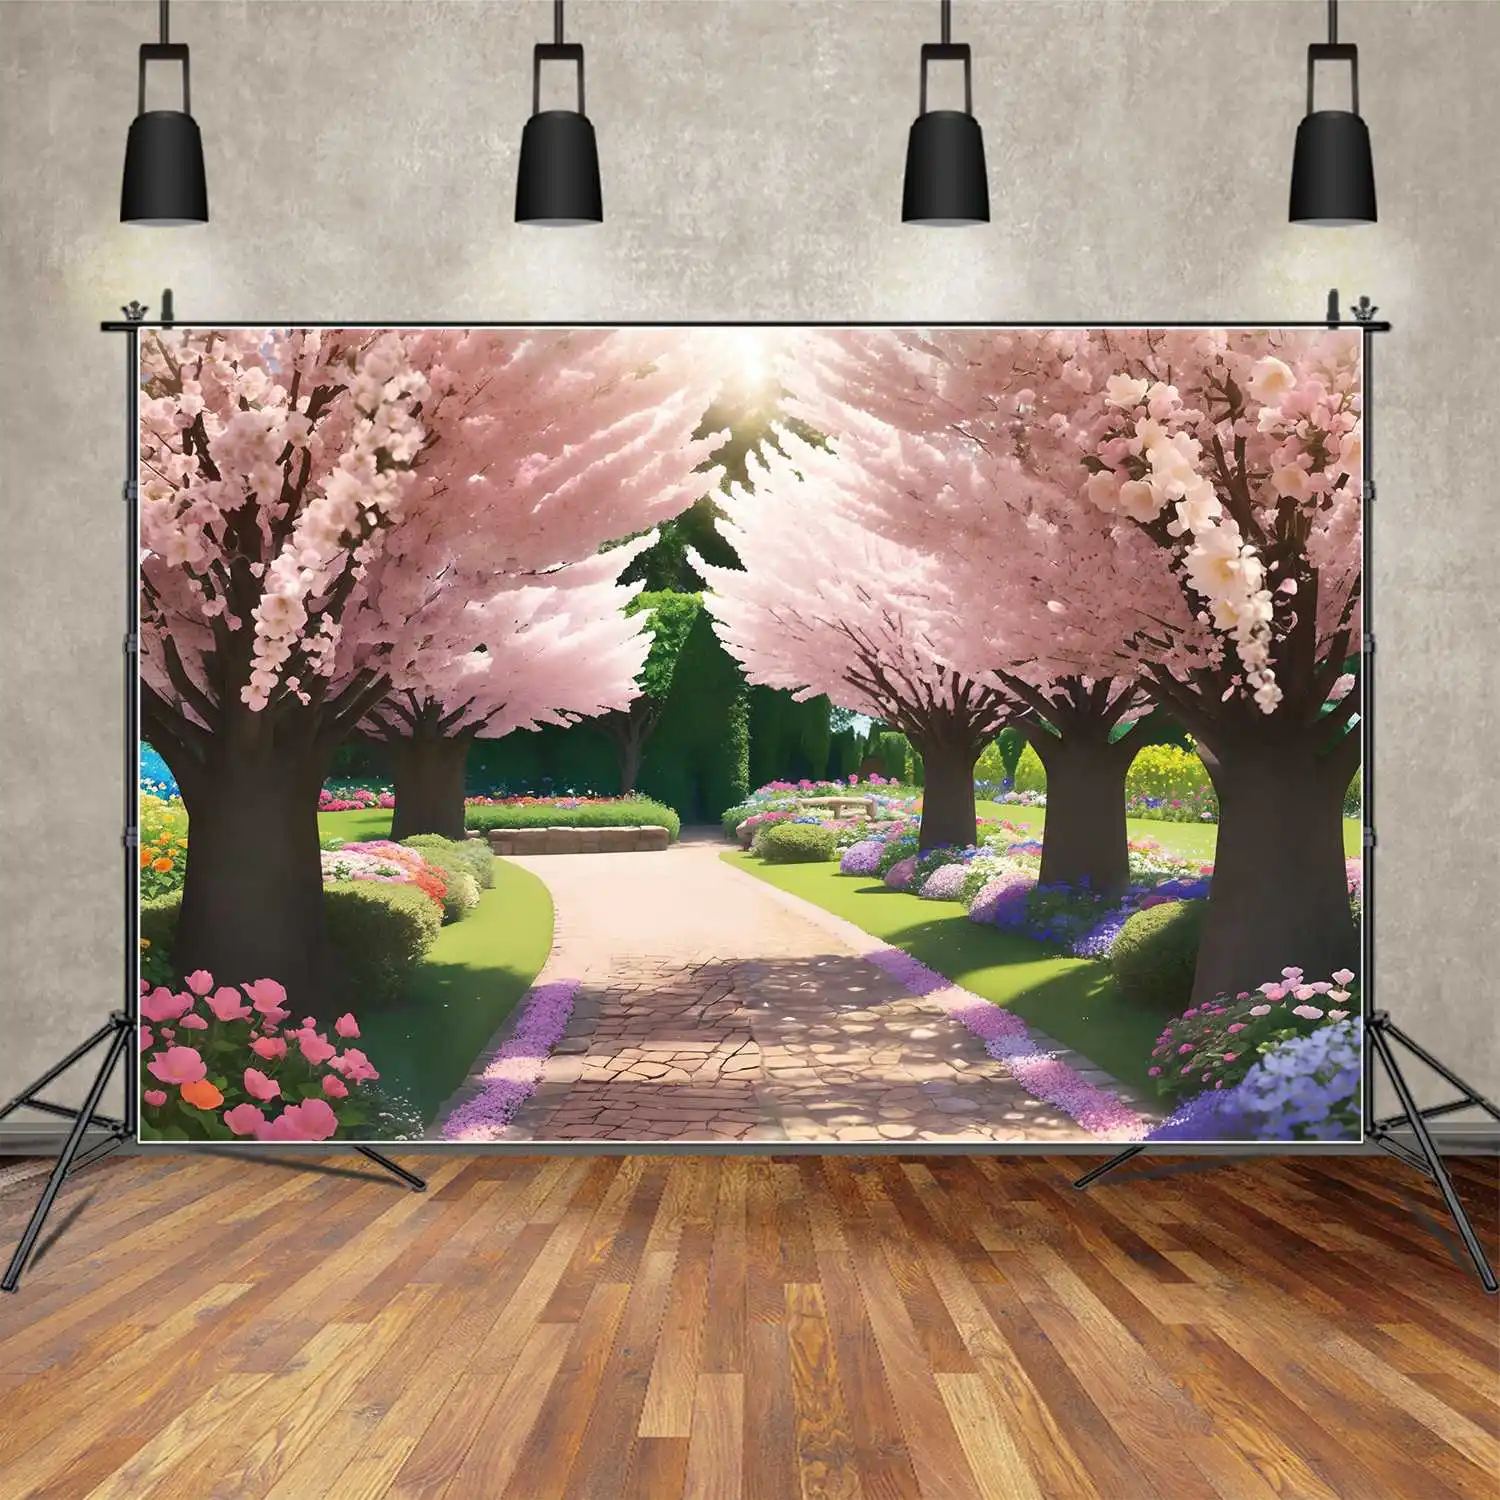 

Spring Floral Blossom Party Backdrops Photography Decor Garden Flowers Custom Baby Photo Booth Photographic Backgrounds